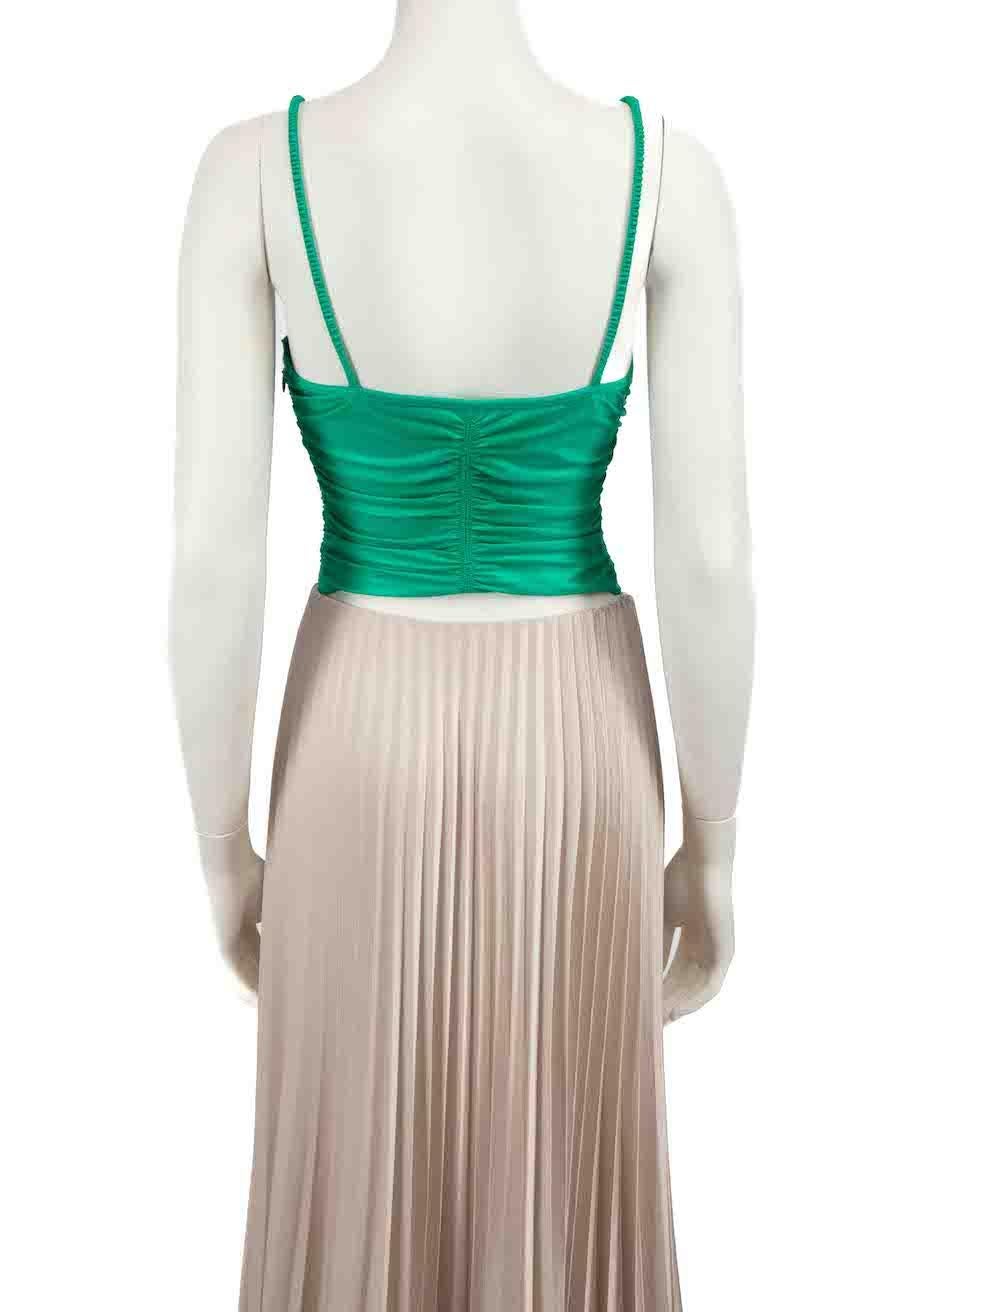 Alexander Wang Green Stretch Ruched Crop Top Size S In Good Condition For Sale In London, GB